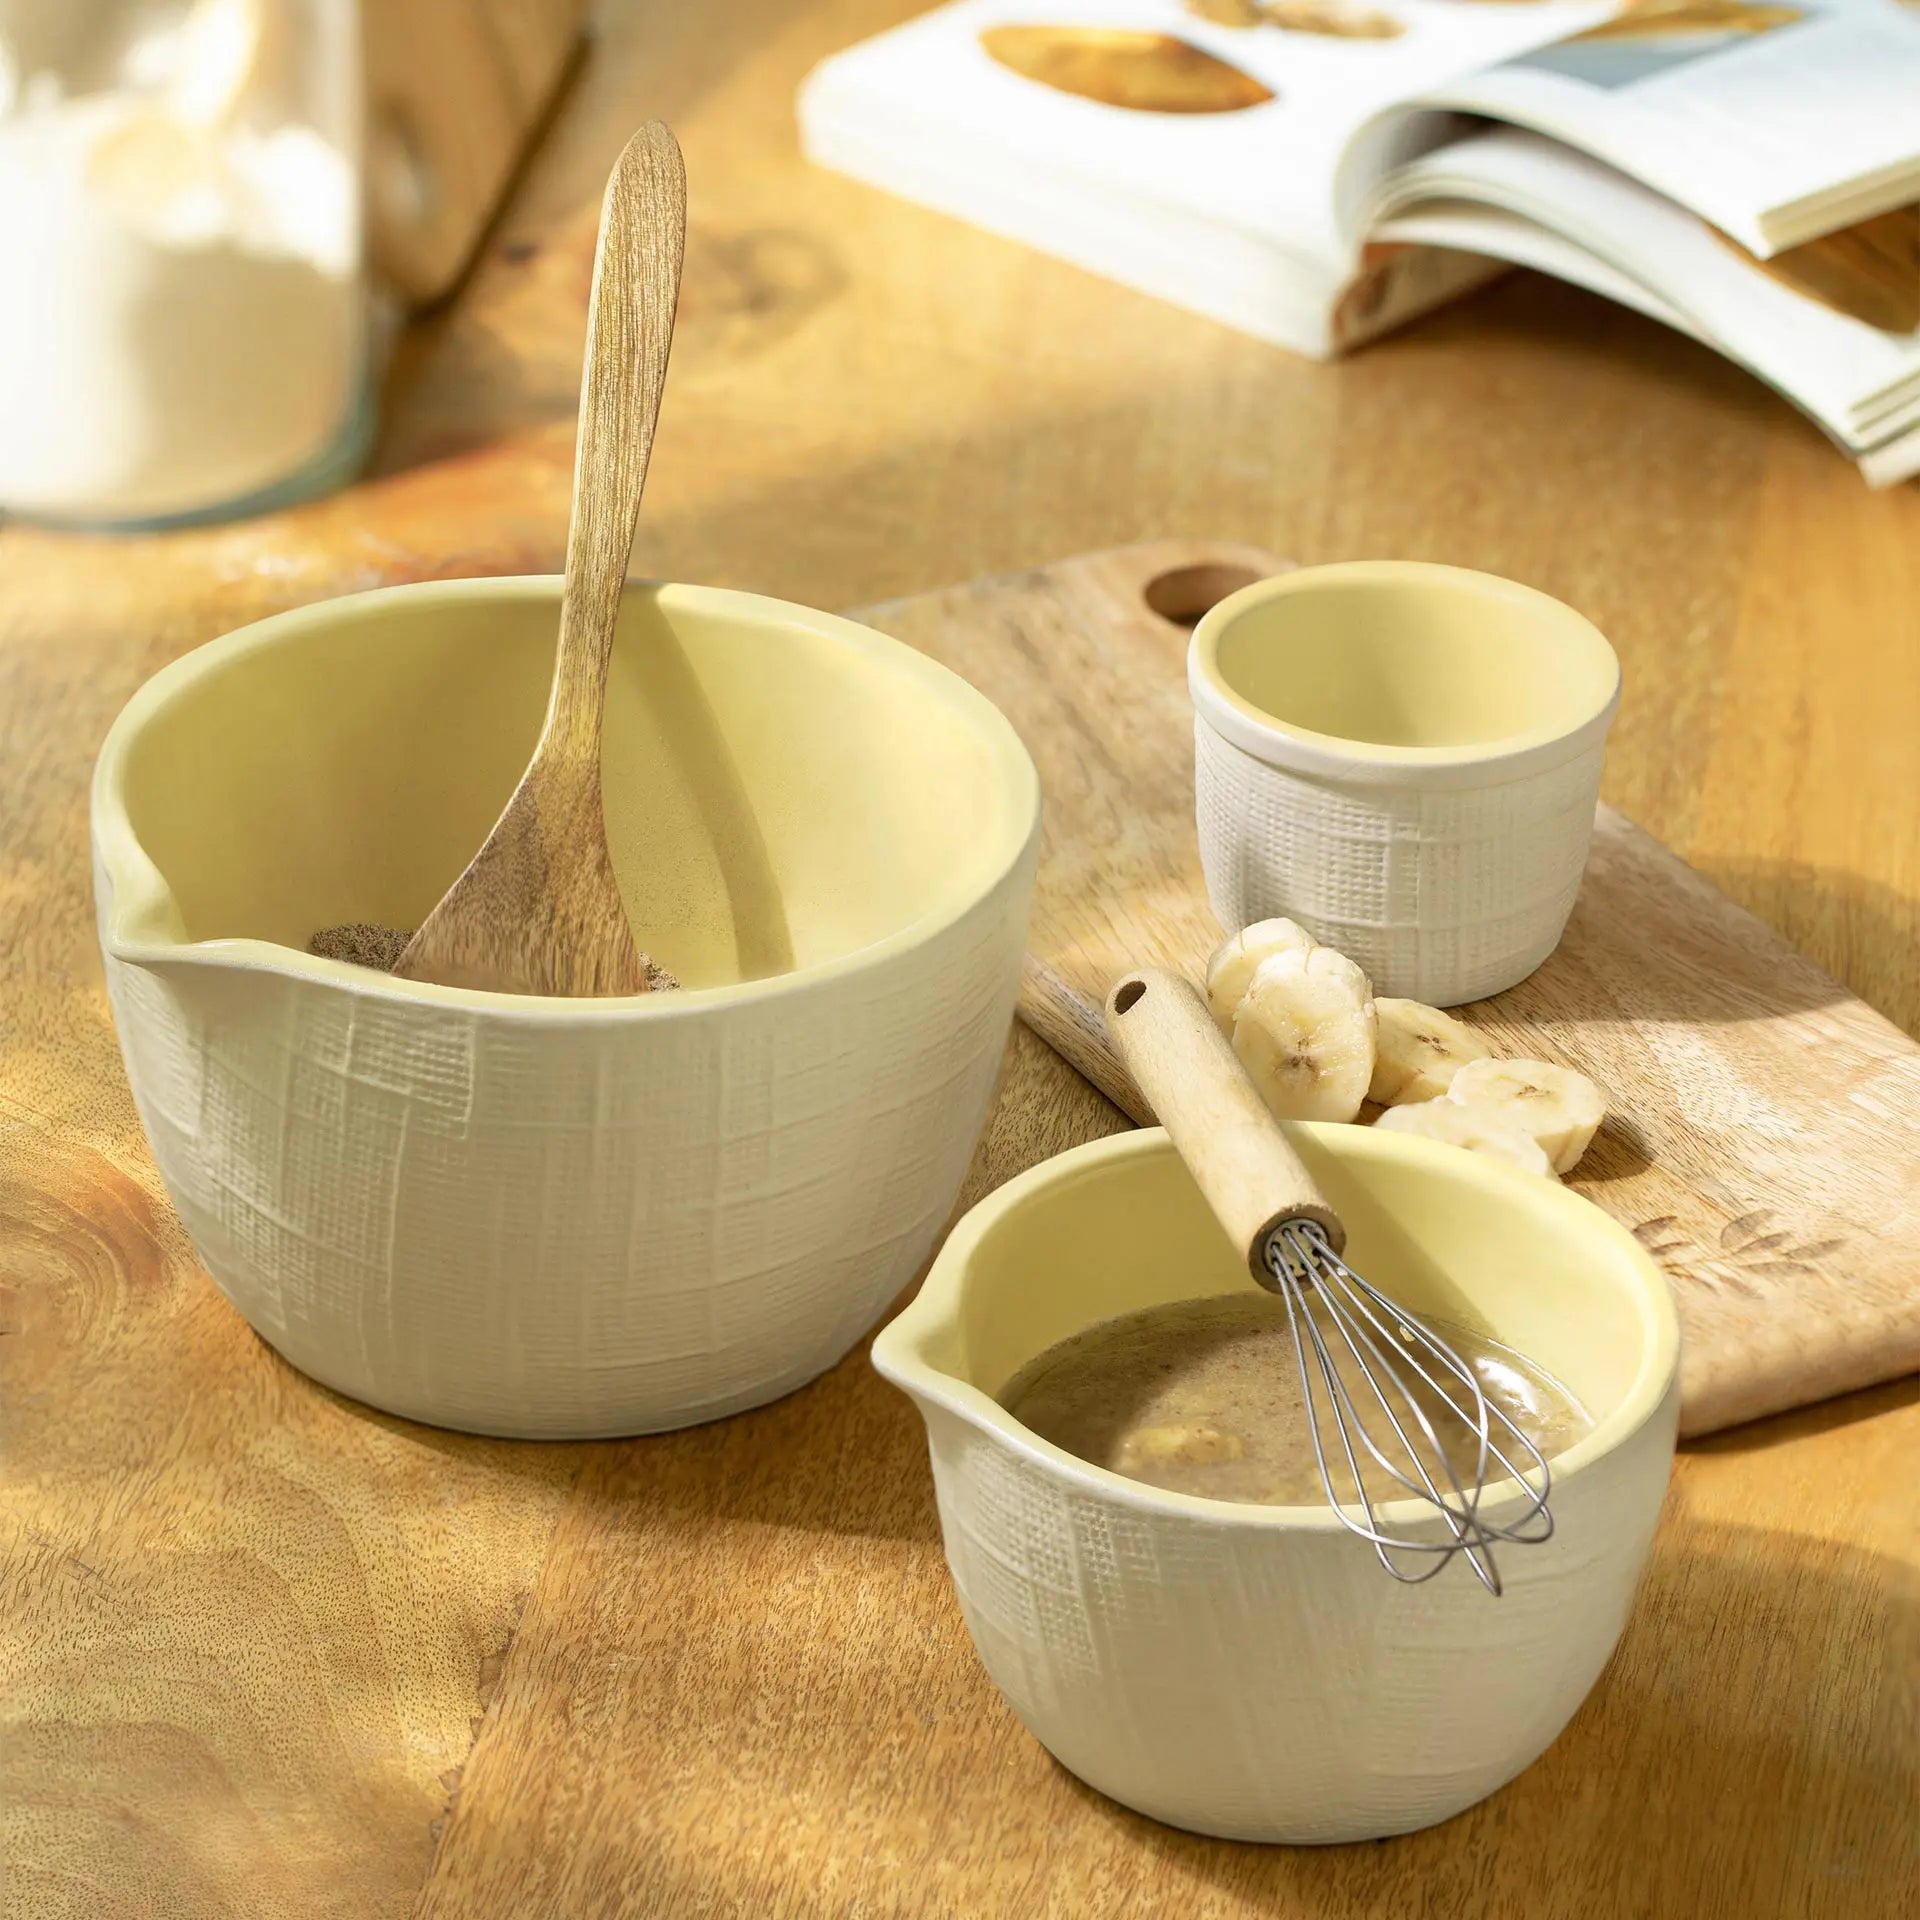 Butter-up Ceramic Mixing Bowl - Large